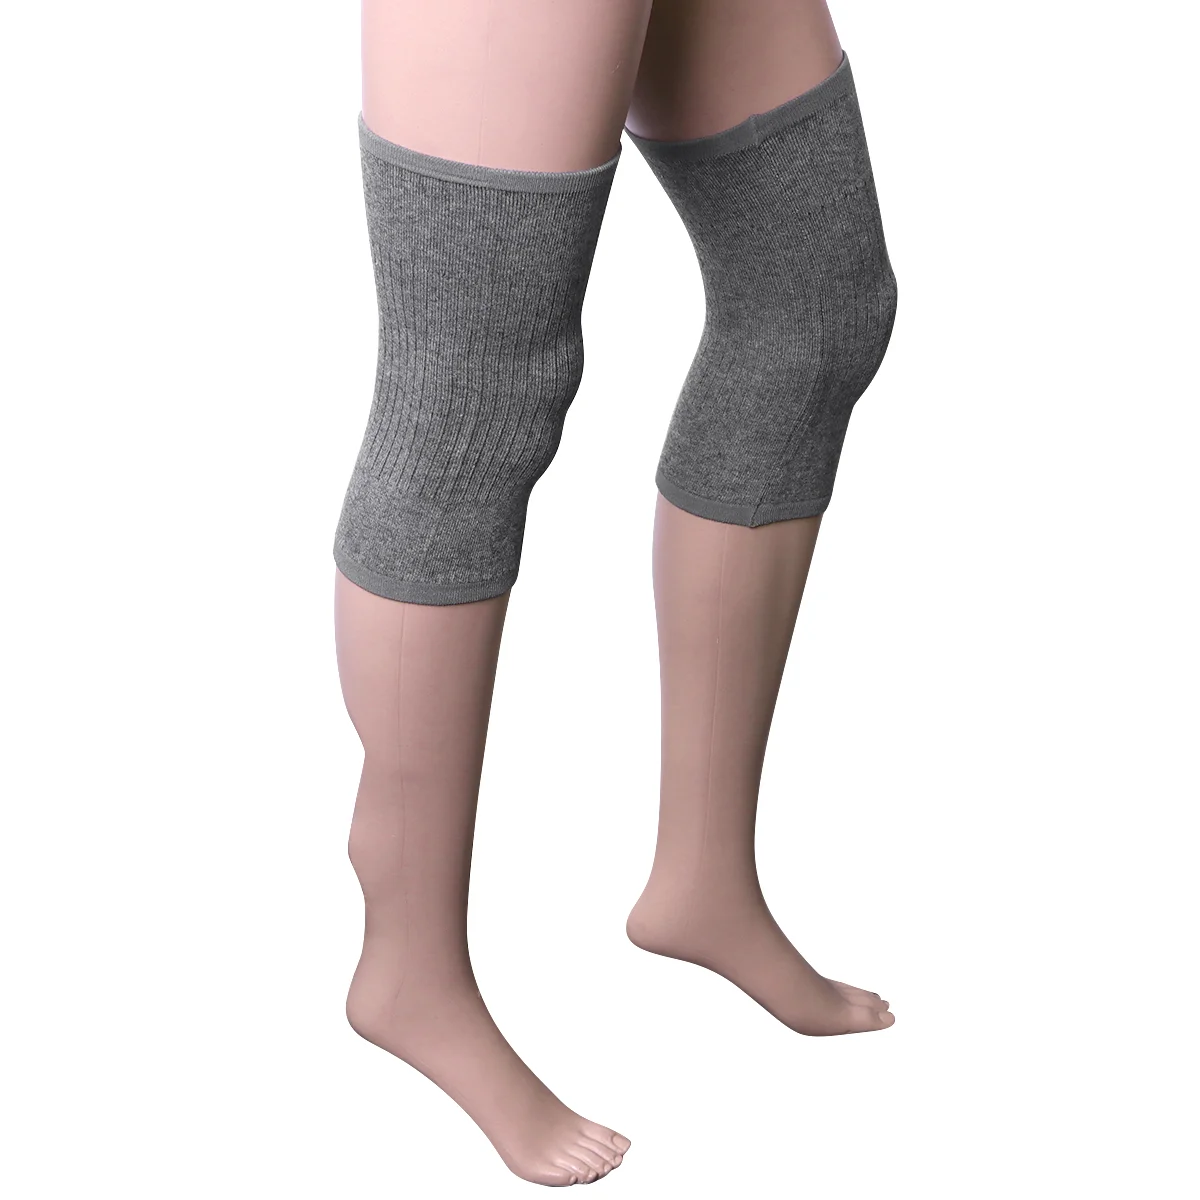 

Knee Sleeve Warmers Brace Warmer Winter Warm Leg Protector Pad Support Thermal Pads Knitted Cashmere Wool Non Soft Elastic Cozy